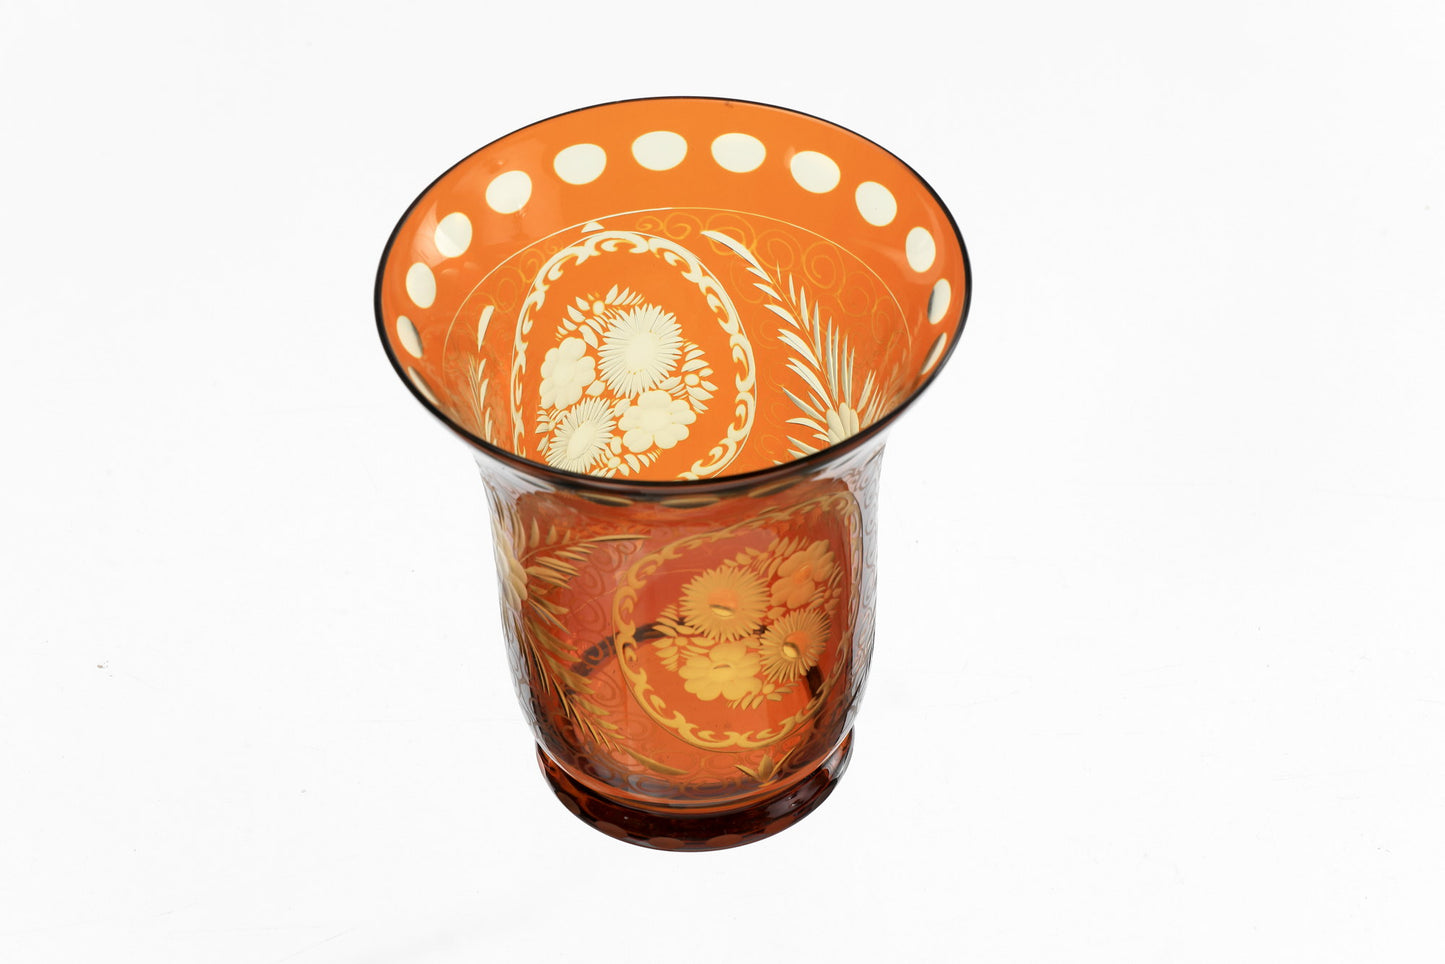 Rust-colored Bohemian crystal goblet